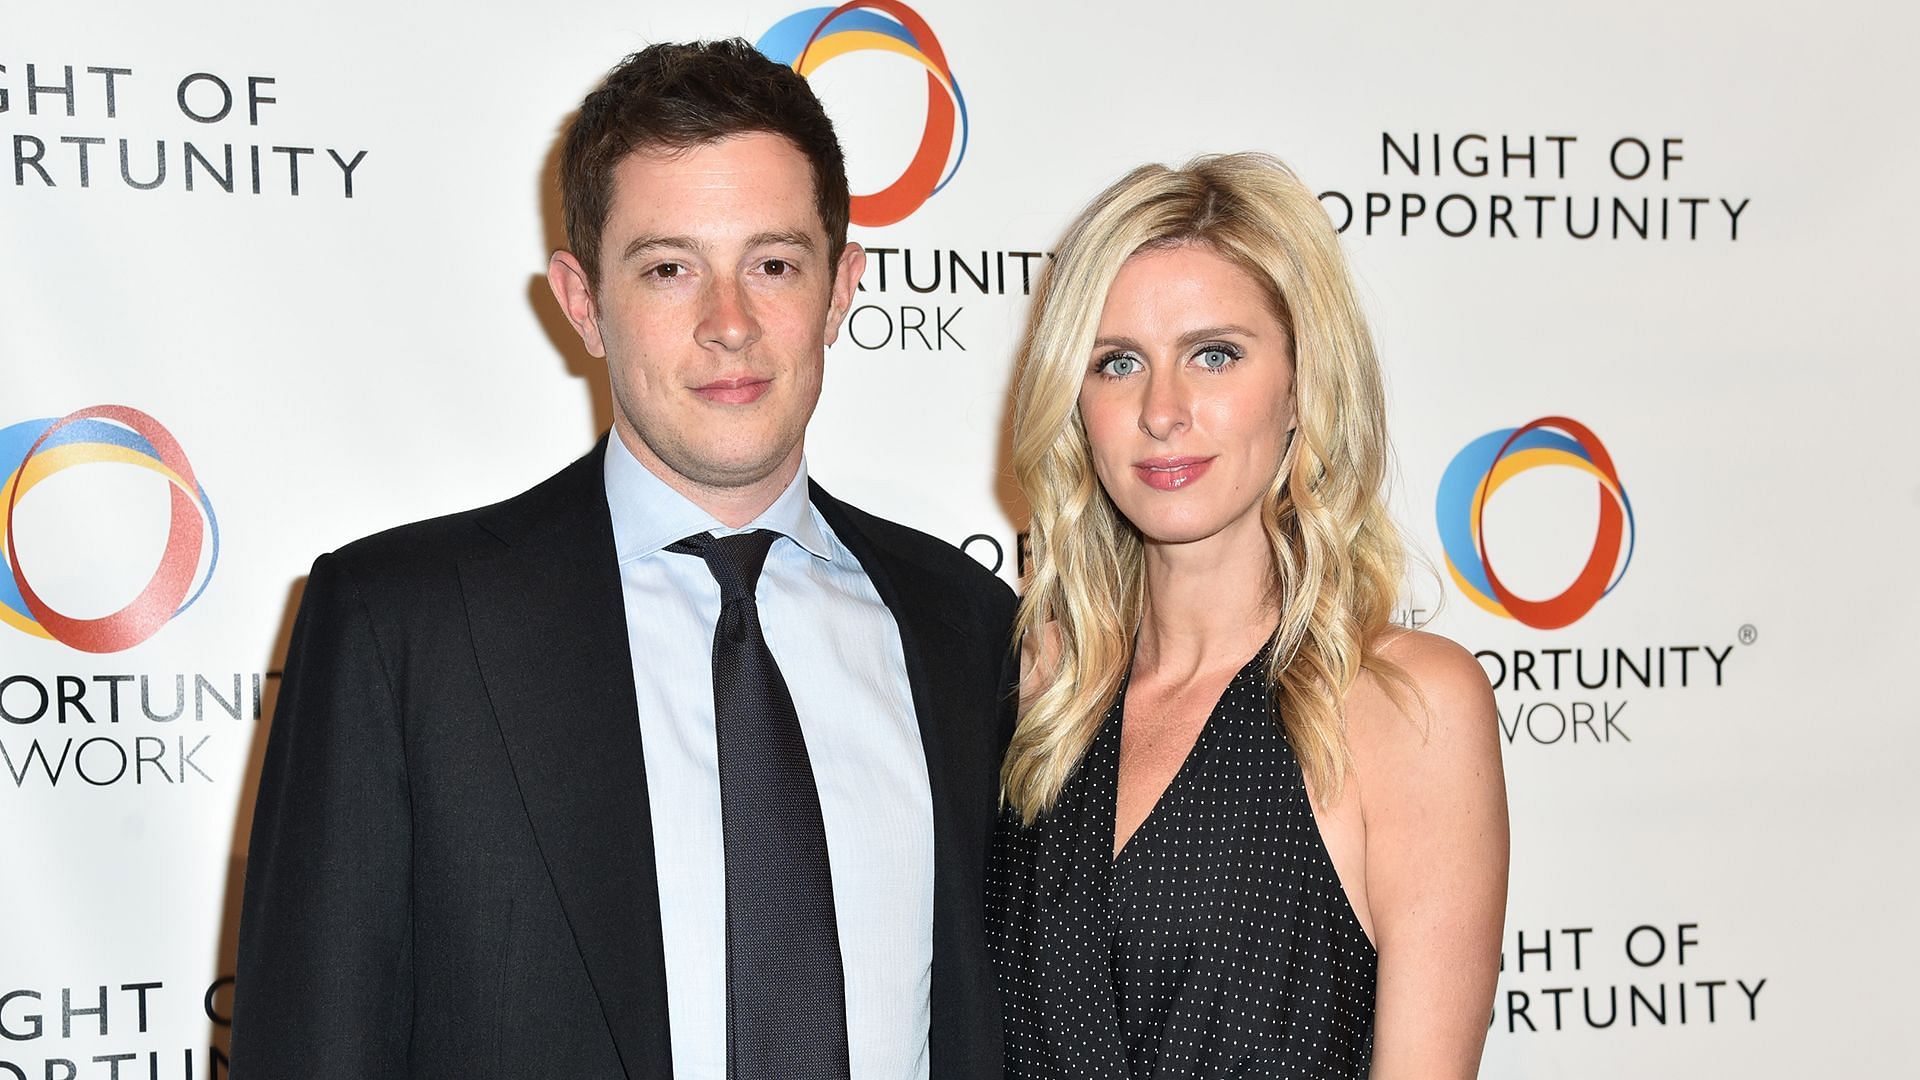 Nicky Hilton and James Rothschild are already parents to two daughters, Lily and Theodora (Image via Jared Siskin/ Patrick McMullan/Getty Images)